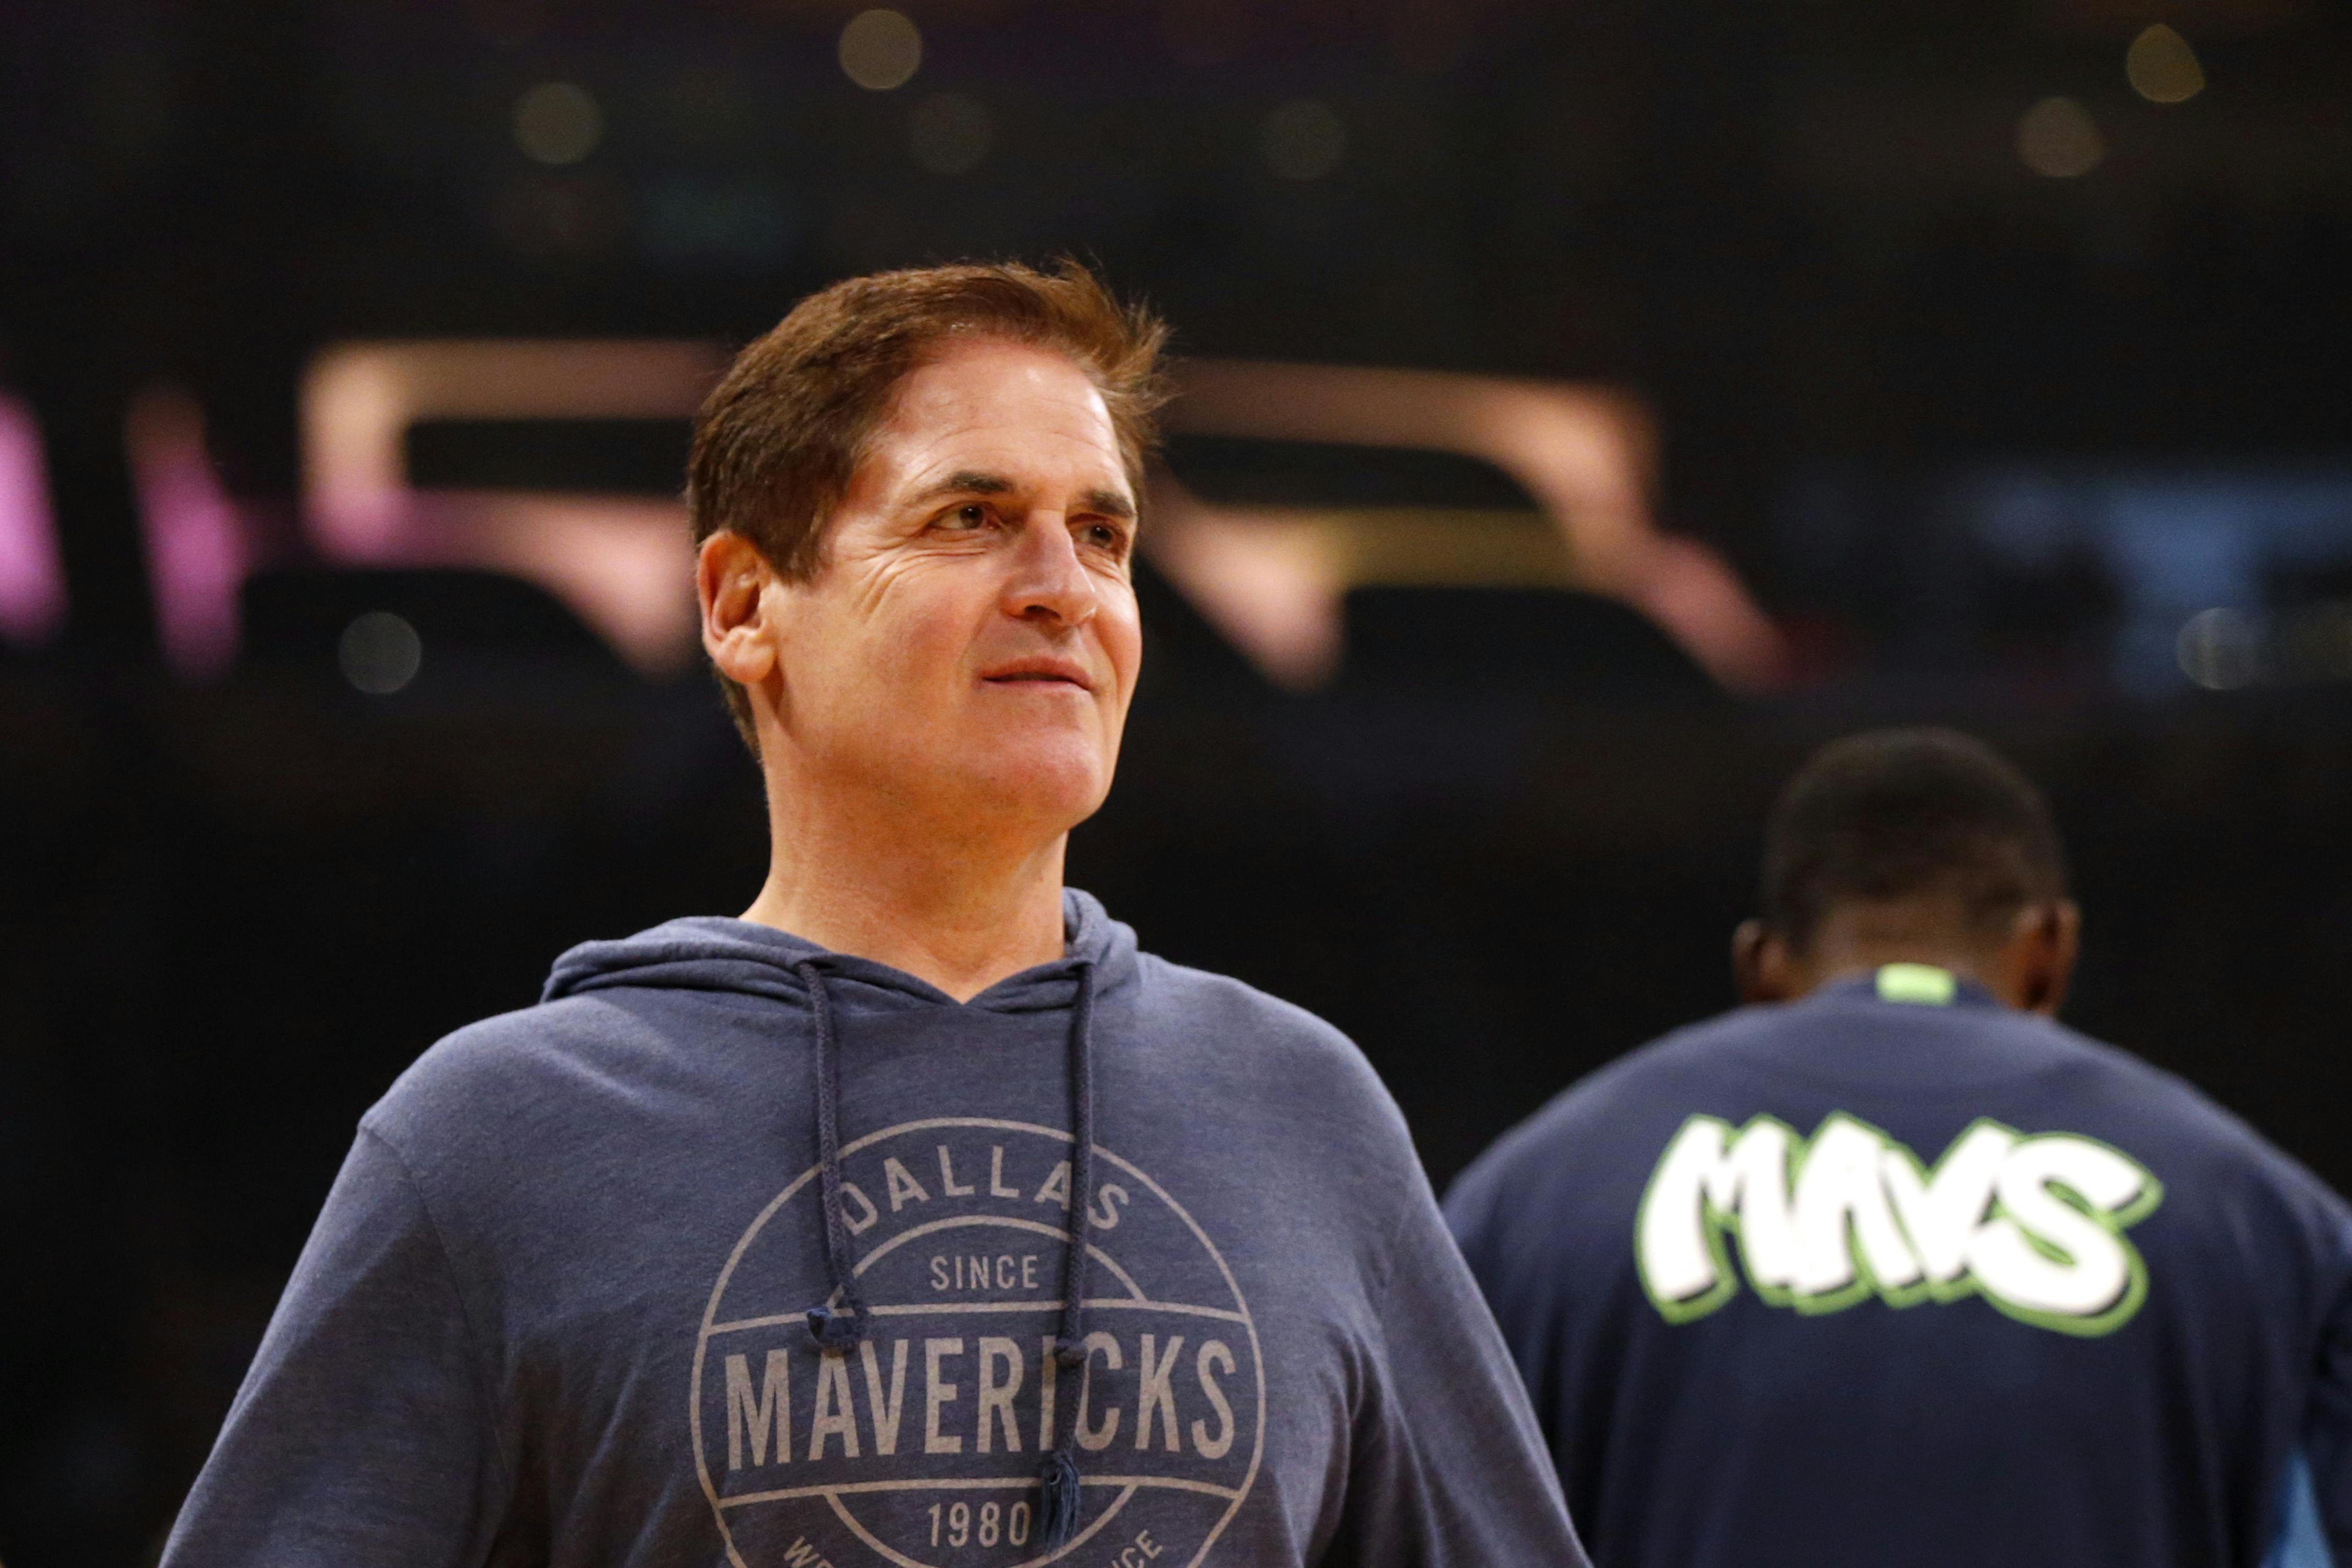 Mark Cuban has been taking on the drug industry. but which one?